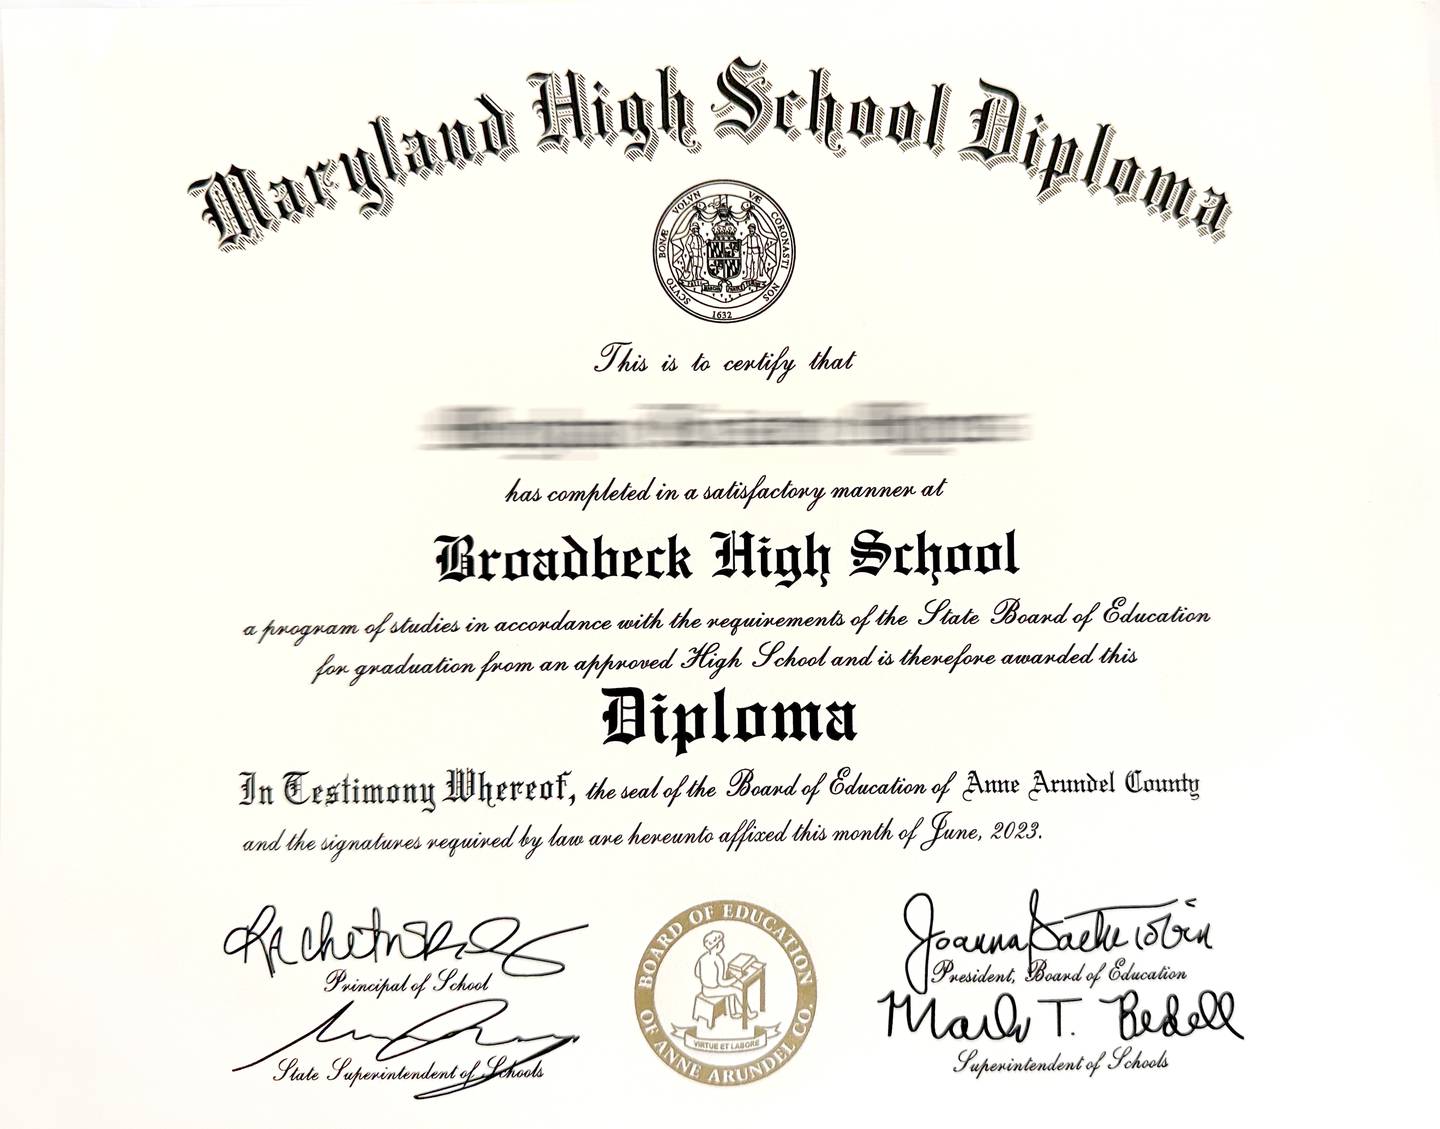 Broadneck High School diploma misspelled the name of the school.